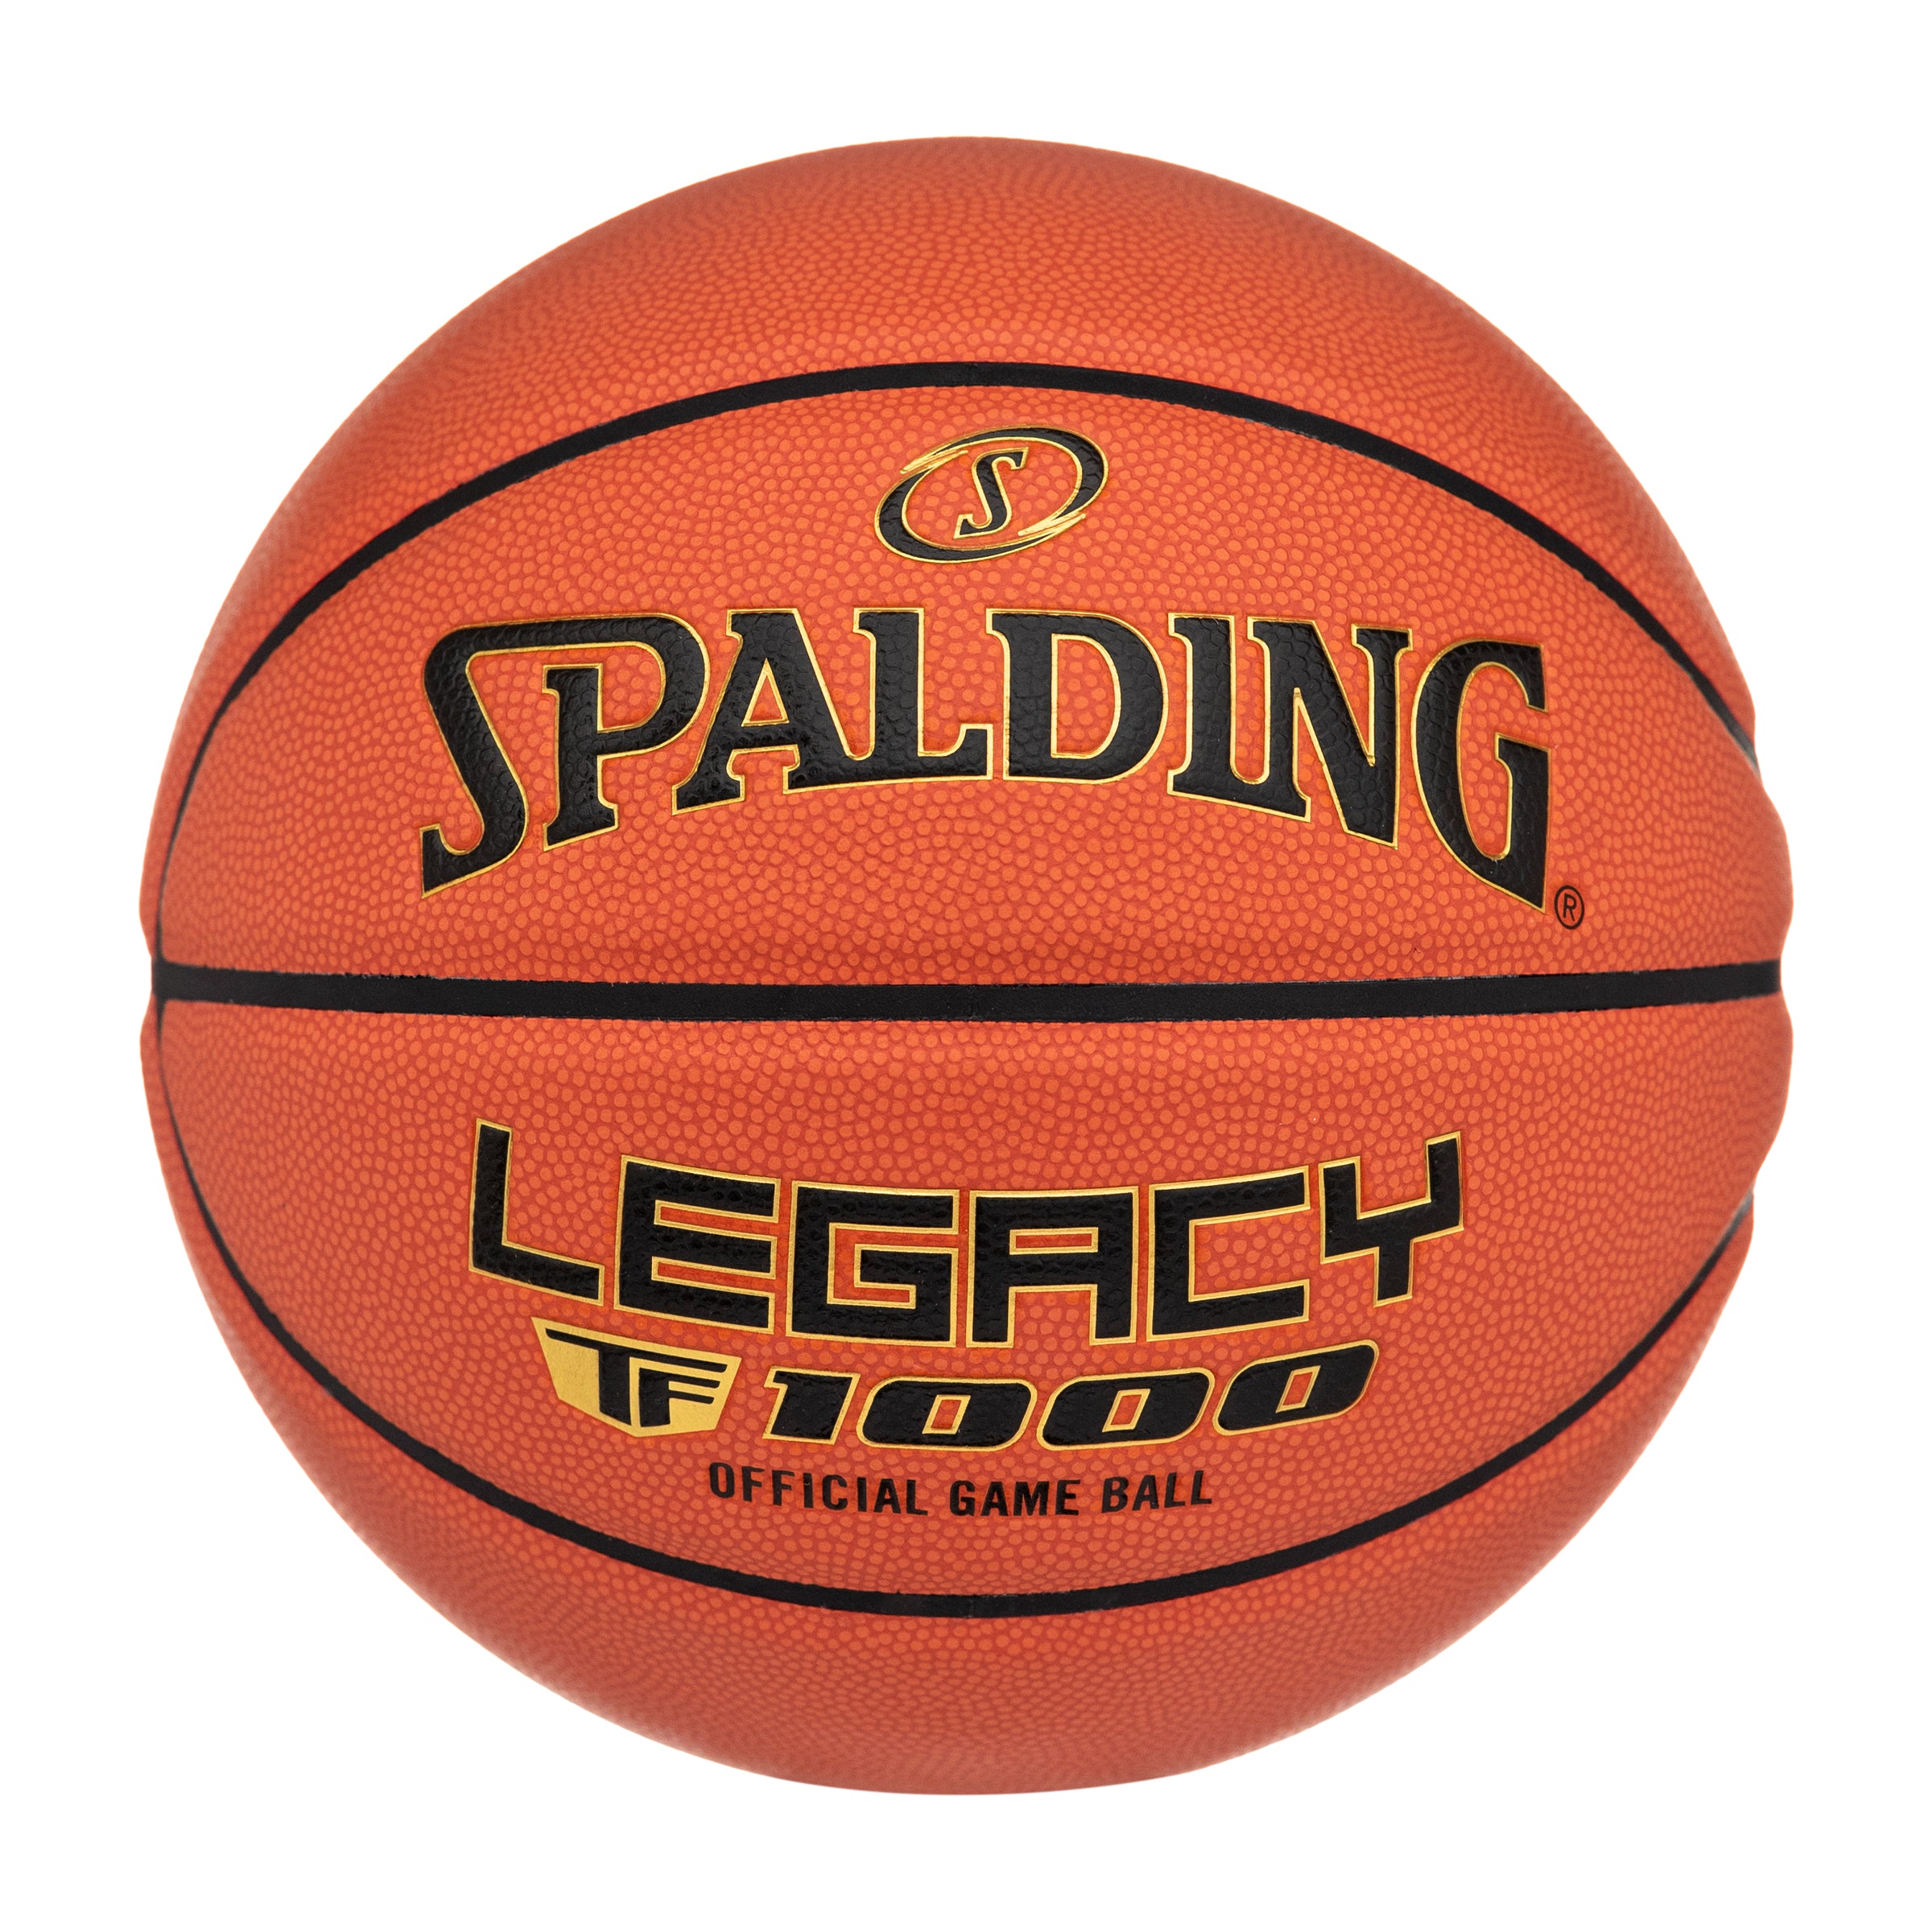 Spalding Precision TF-1000 AAU Indoor Game Basketball